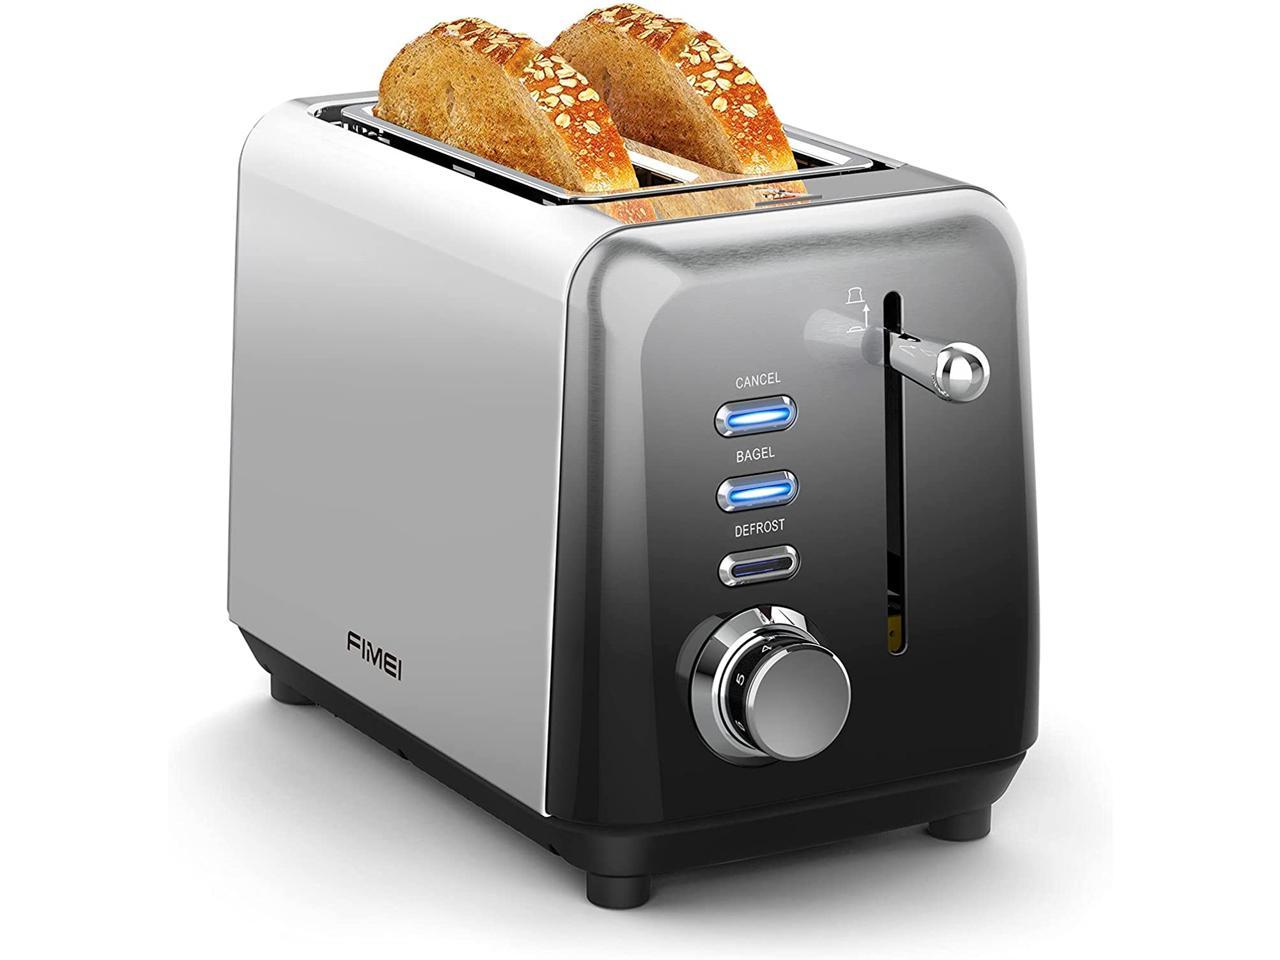 Waffles Toaster 2 Slice Best Rated Prime Toasters Wide Slot Stainless Steel Bagels Toasters Compact Retro Toaster with 7 Bread Shade Setting Removable Crumb Tray for Bread Bagels 